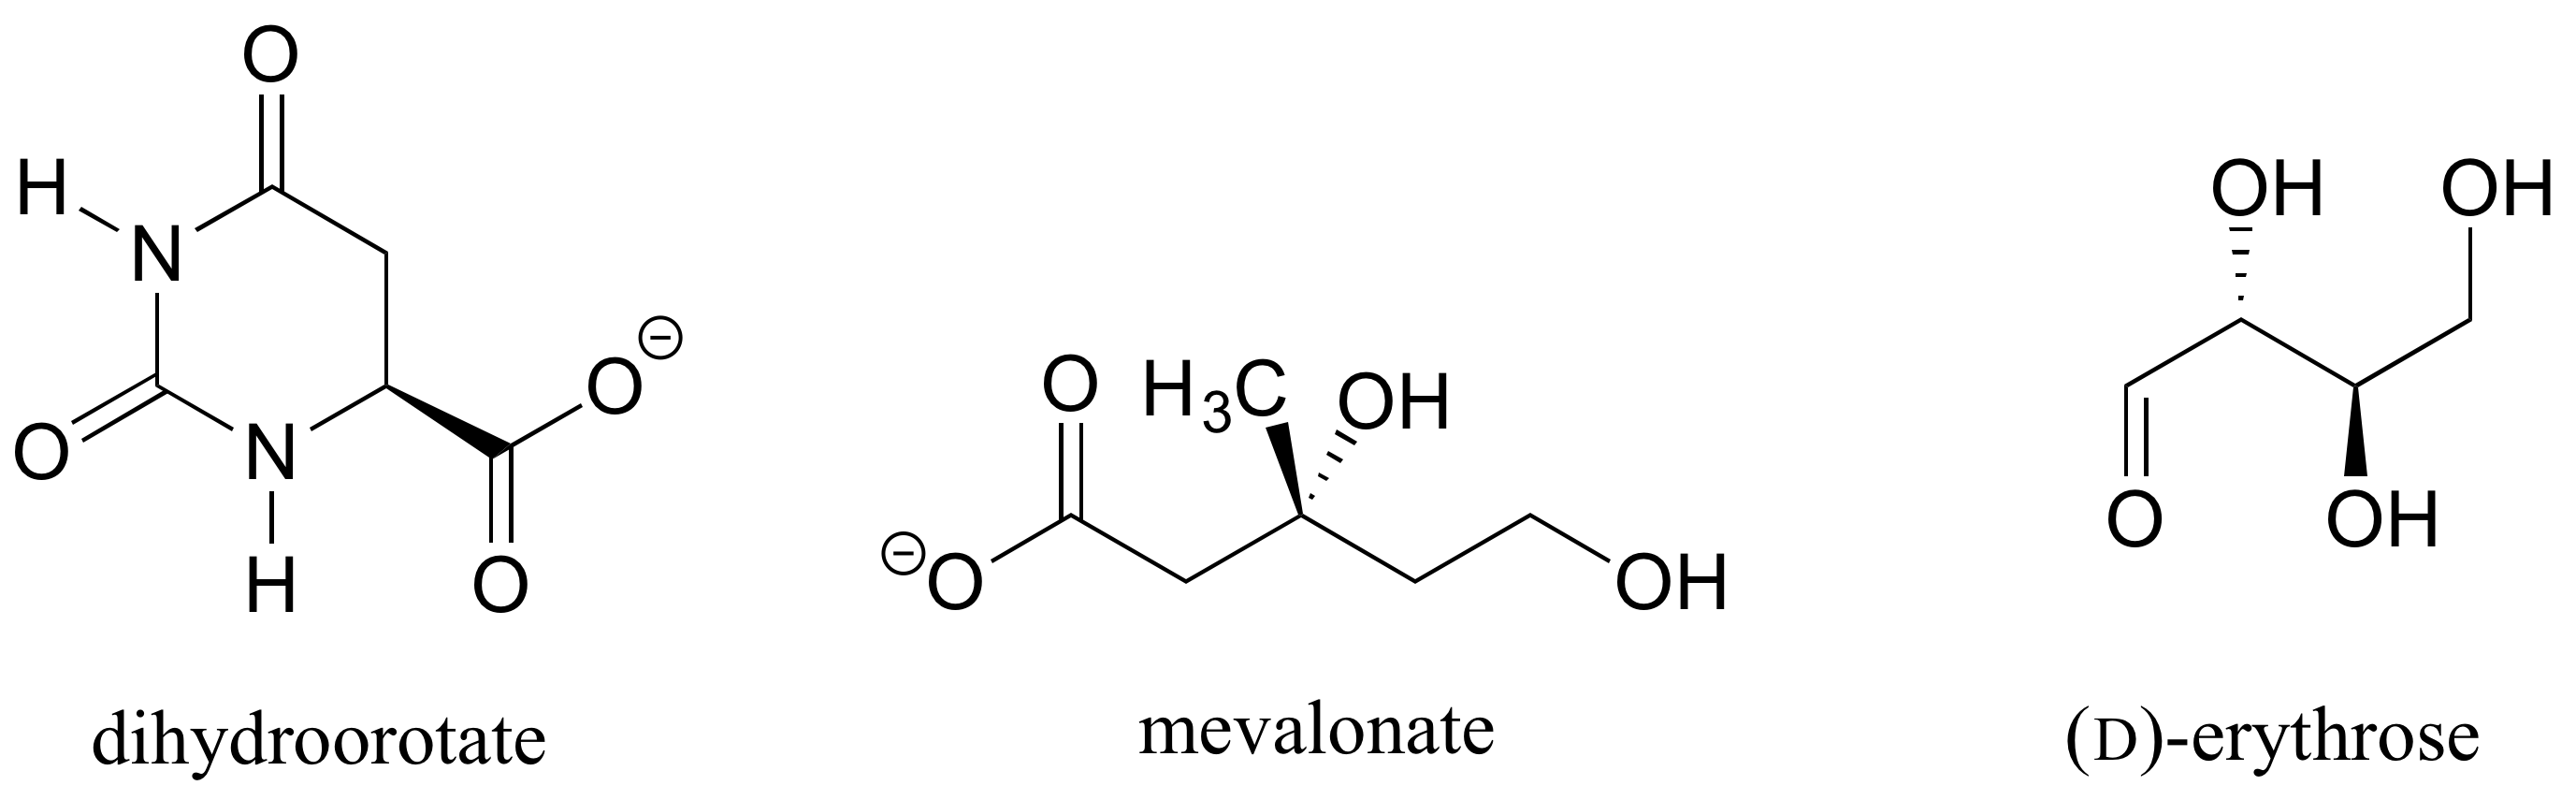 Mevalonate. A 5-carbon chain with a COO- at carbon 1, an OH at carbon 5, and at carbon 3 both an OH and CH3 group. The CH3 group is bonded with a solid wedge, the OH group with a dashed wedge. Two additional structures are shown called dihydroorotate and (D)-erythrose. Ask your instructor for descriptions if you would like a full description of these..